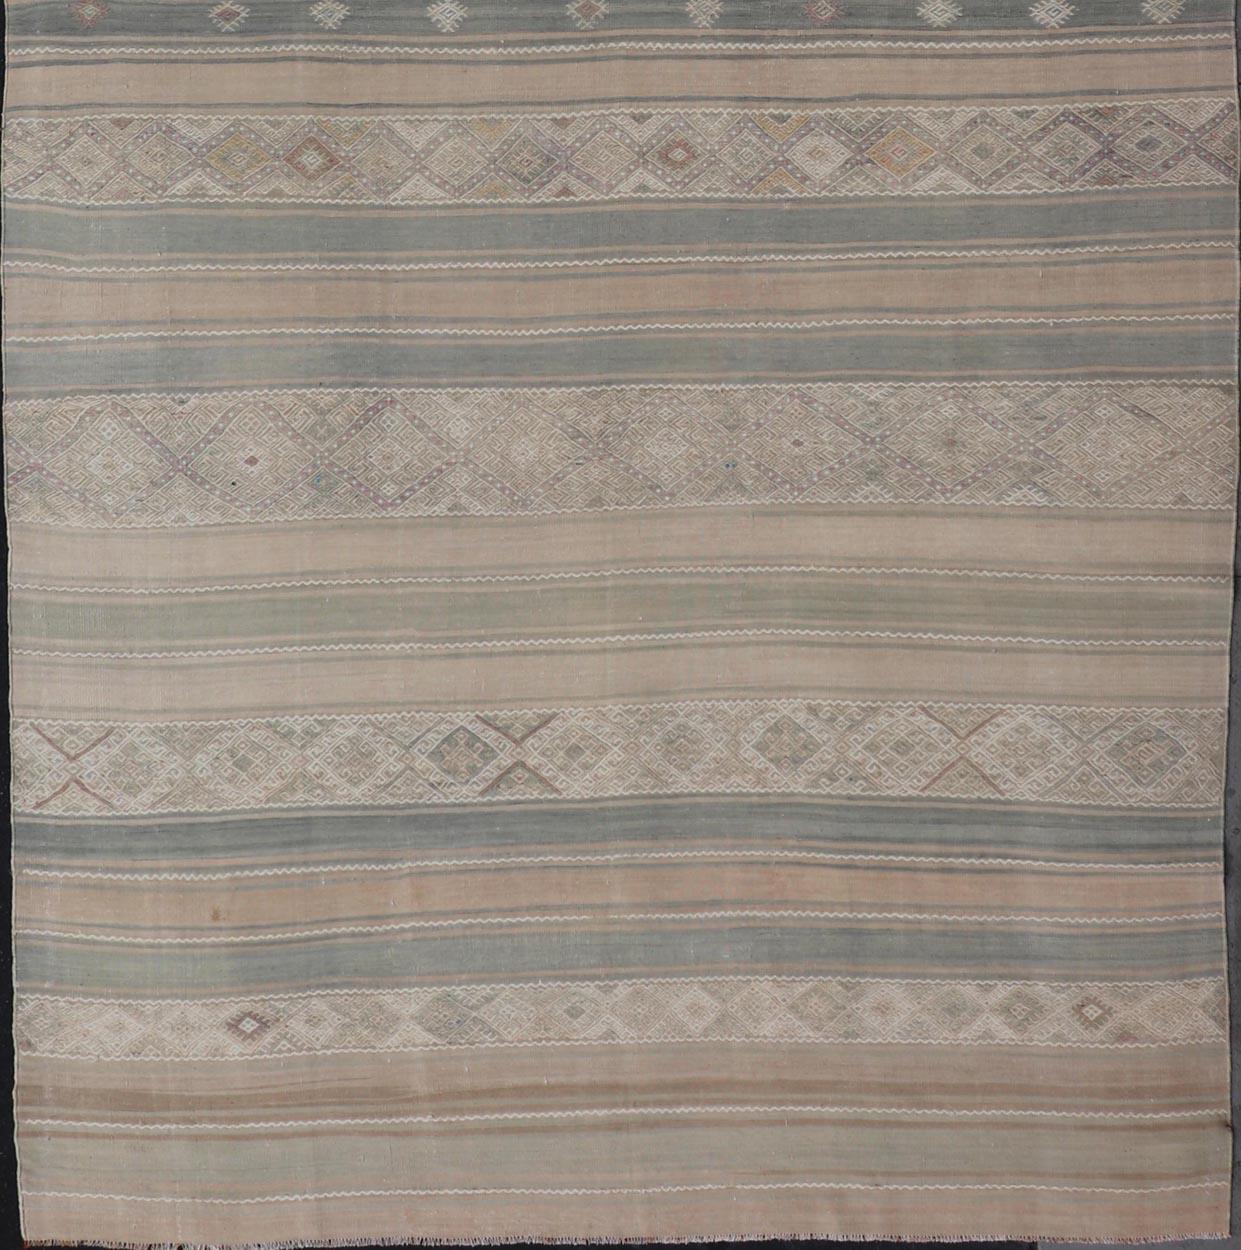 20th Century Gallery Vintage Turkish Flat-Weave Kilim with Embroideries in Earthy Tones